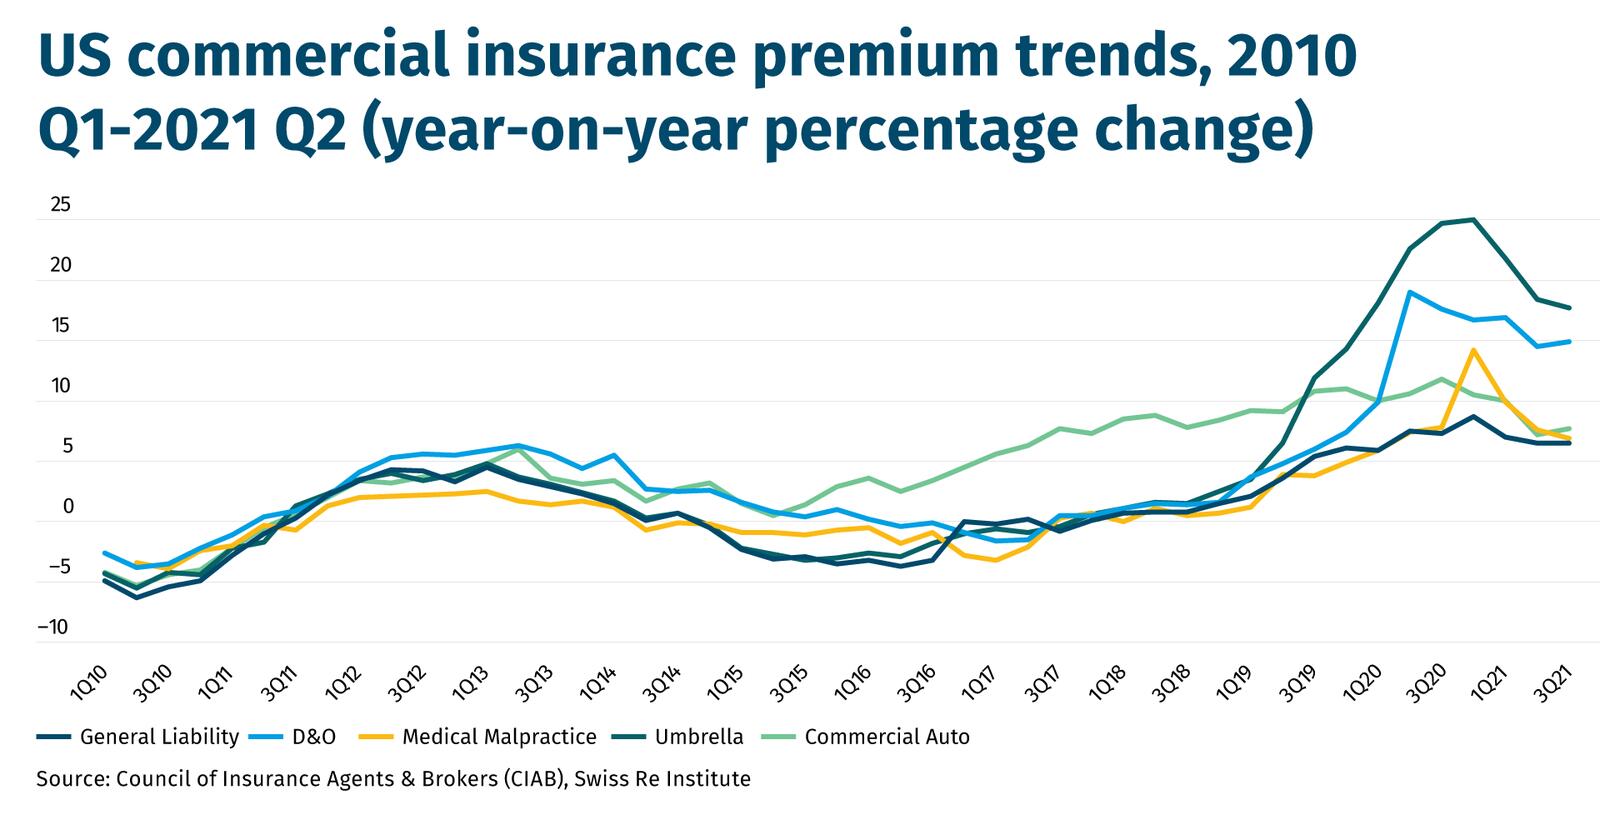 US commercial insurance premium trends, 2010 Q1-2021 Q2 (year-on-year percentage change)  